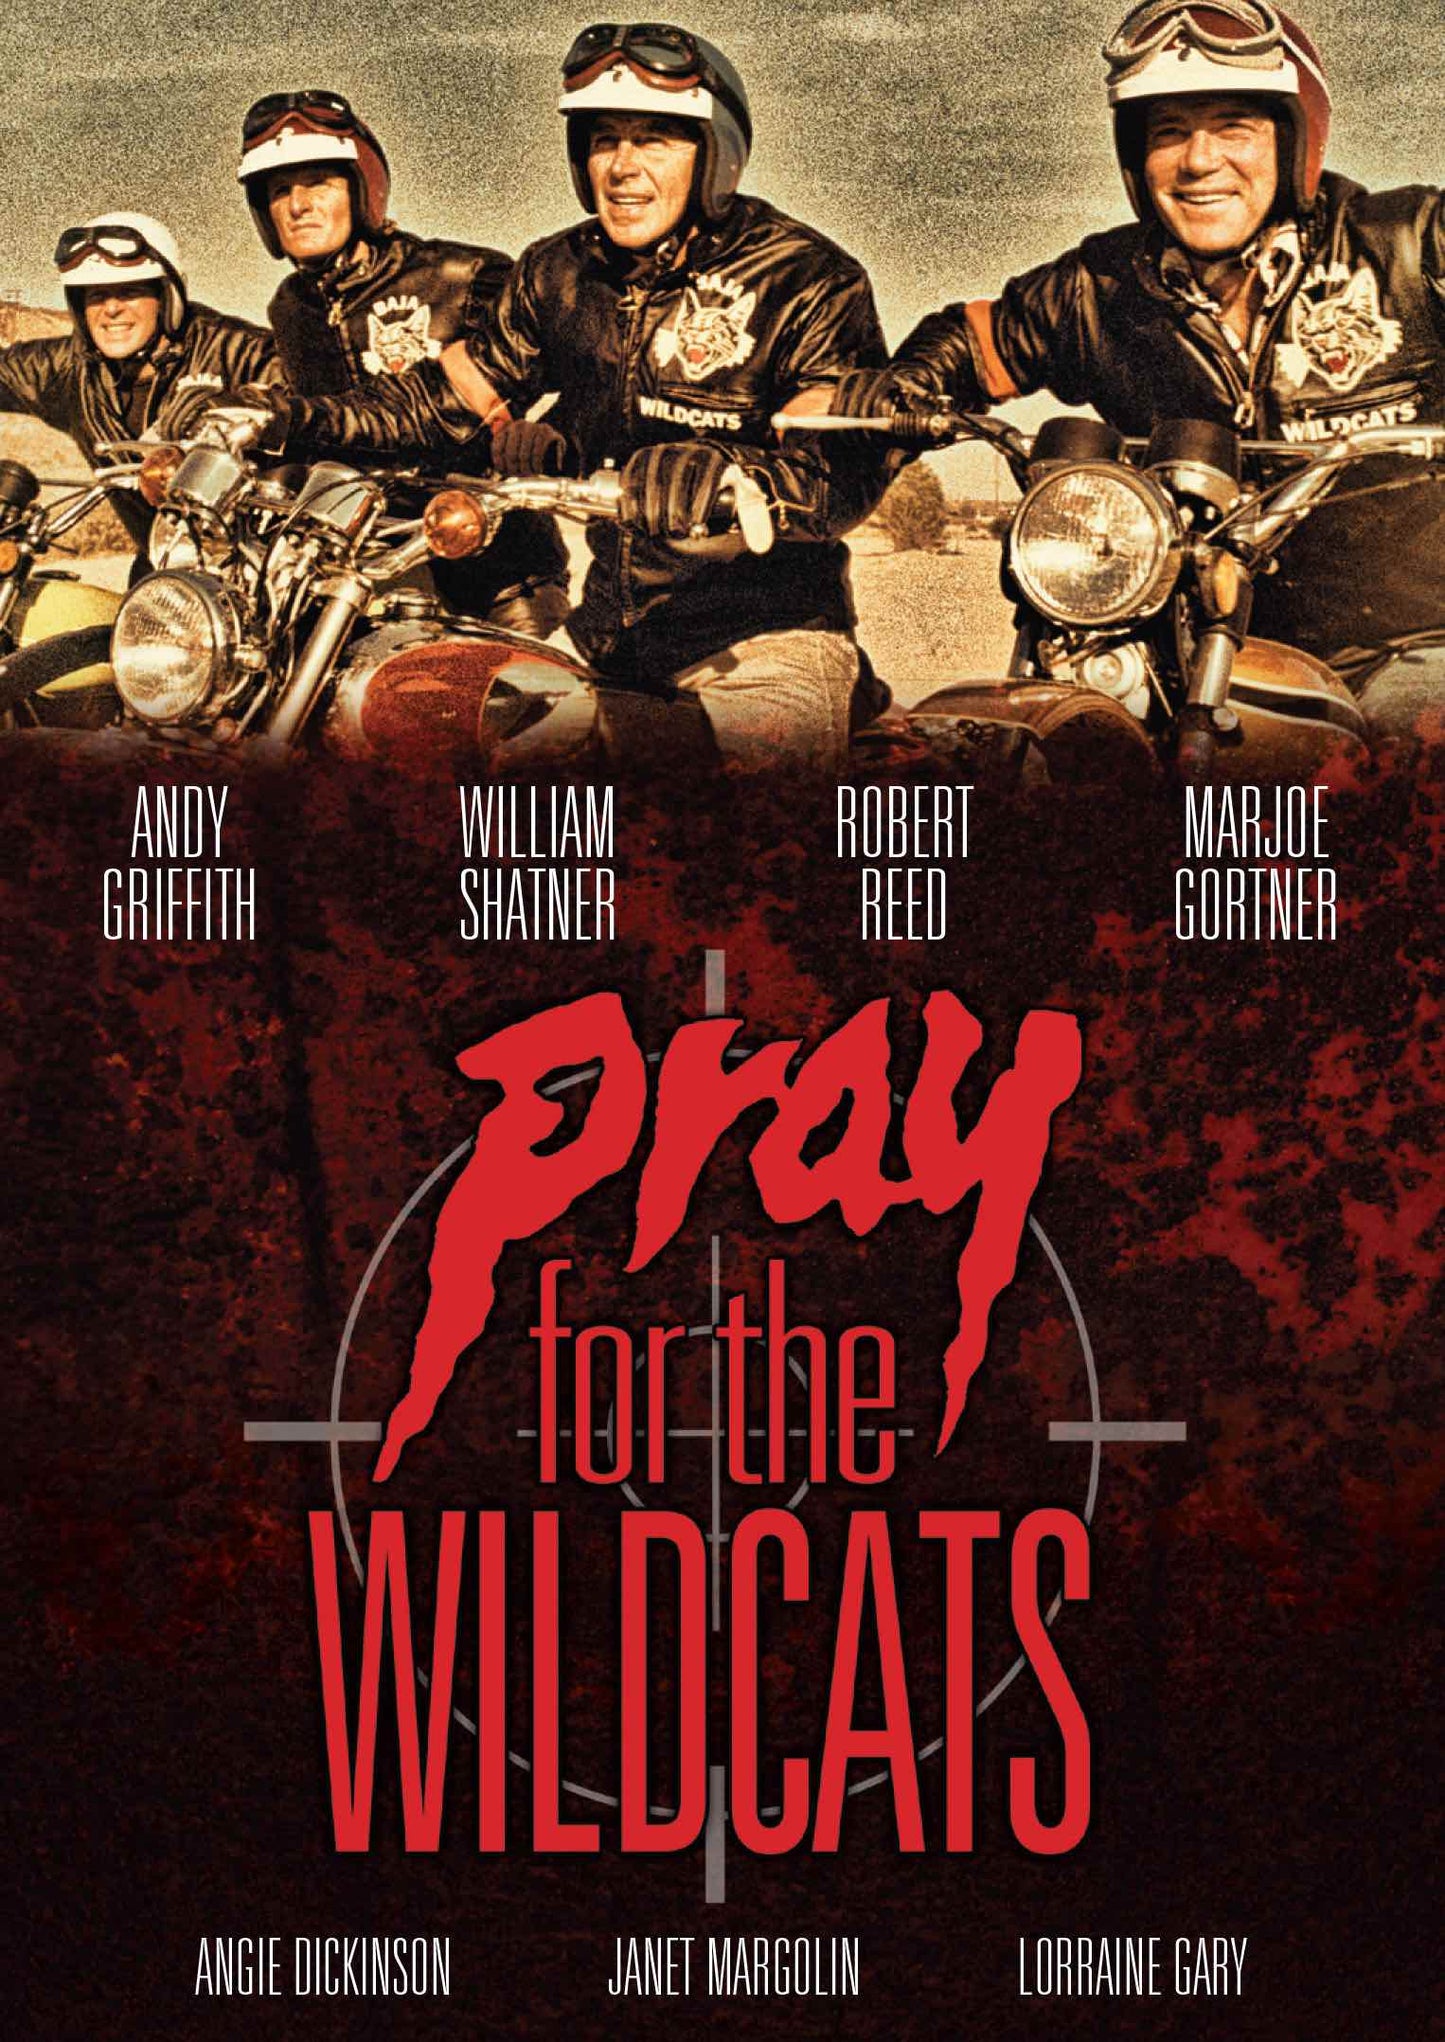 Pray for the Wildcats cover art